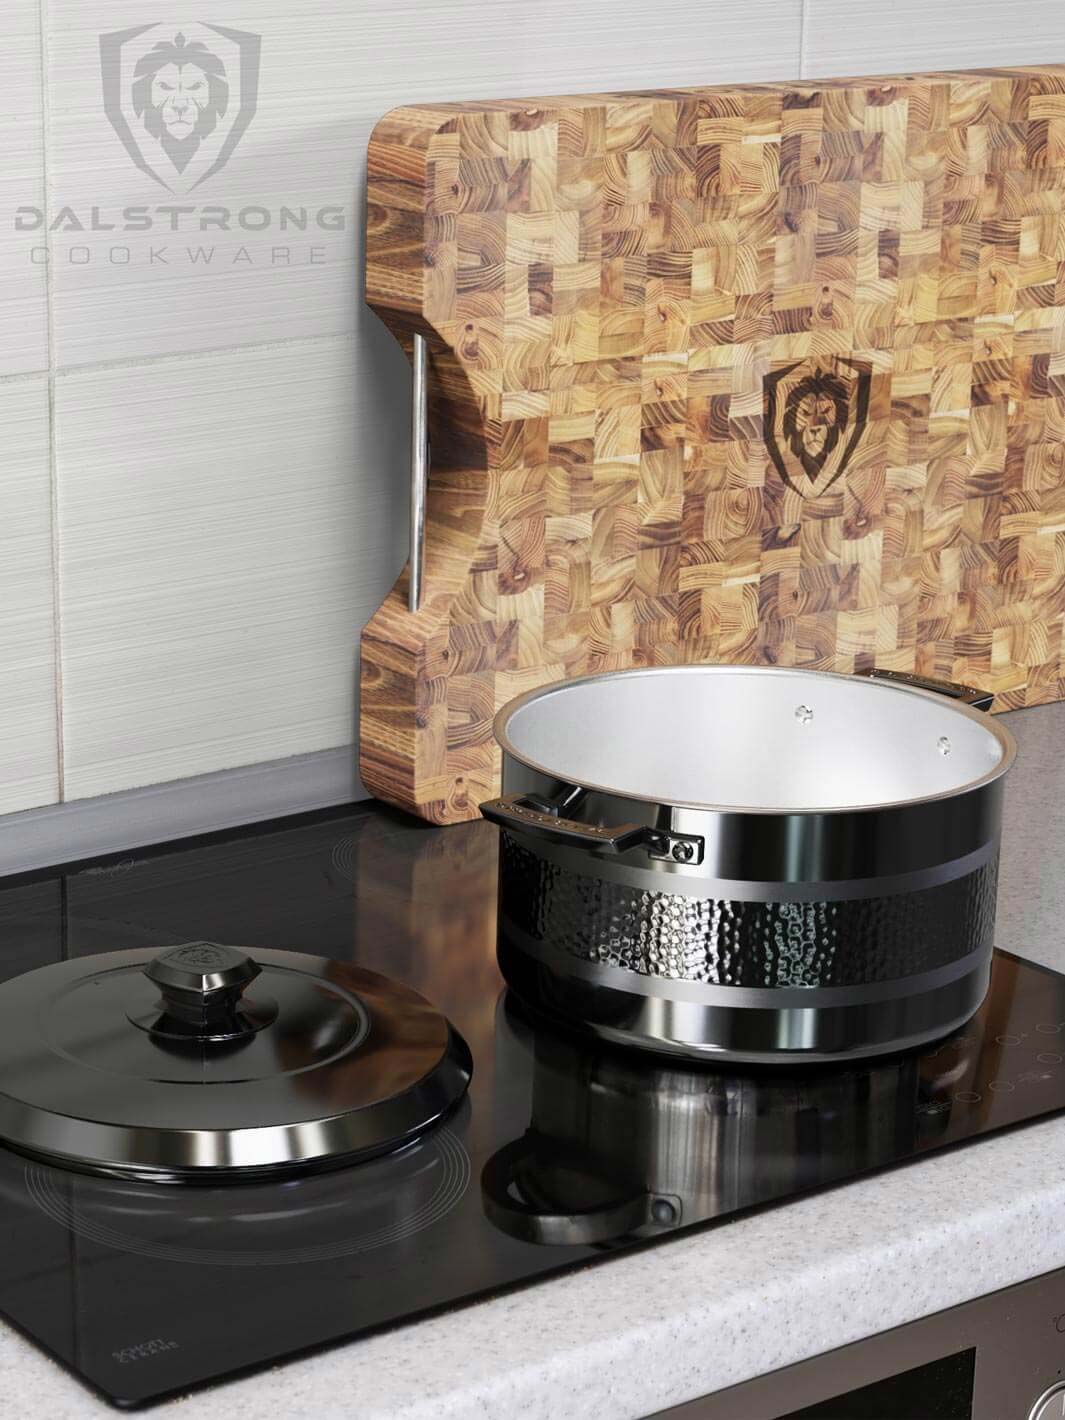 Dalstrong 3 Quart Stock Pot - The Avalon Series - 5-Ply Copper Core - Hammered Finish - Silver Cookware- w/Lid & Pot Protector